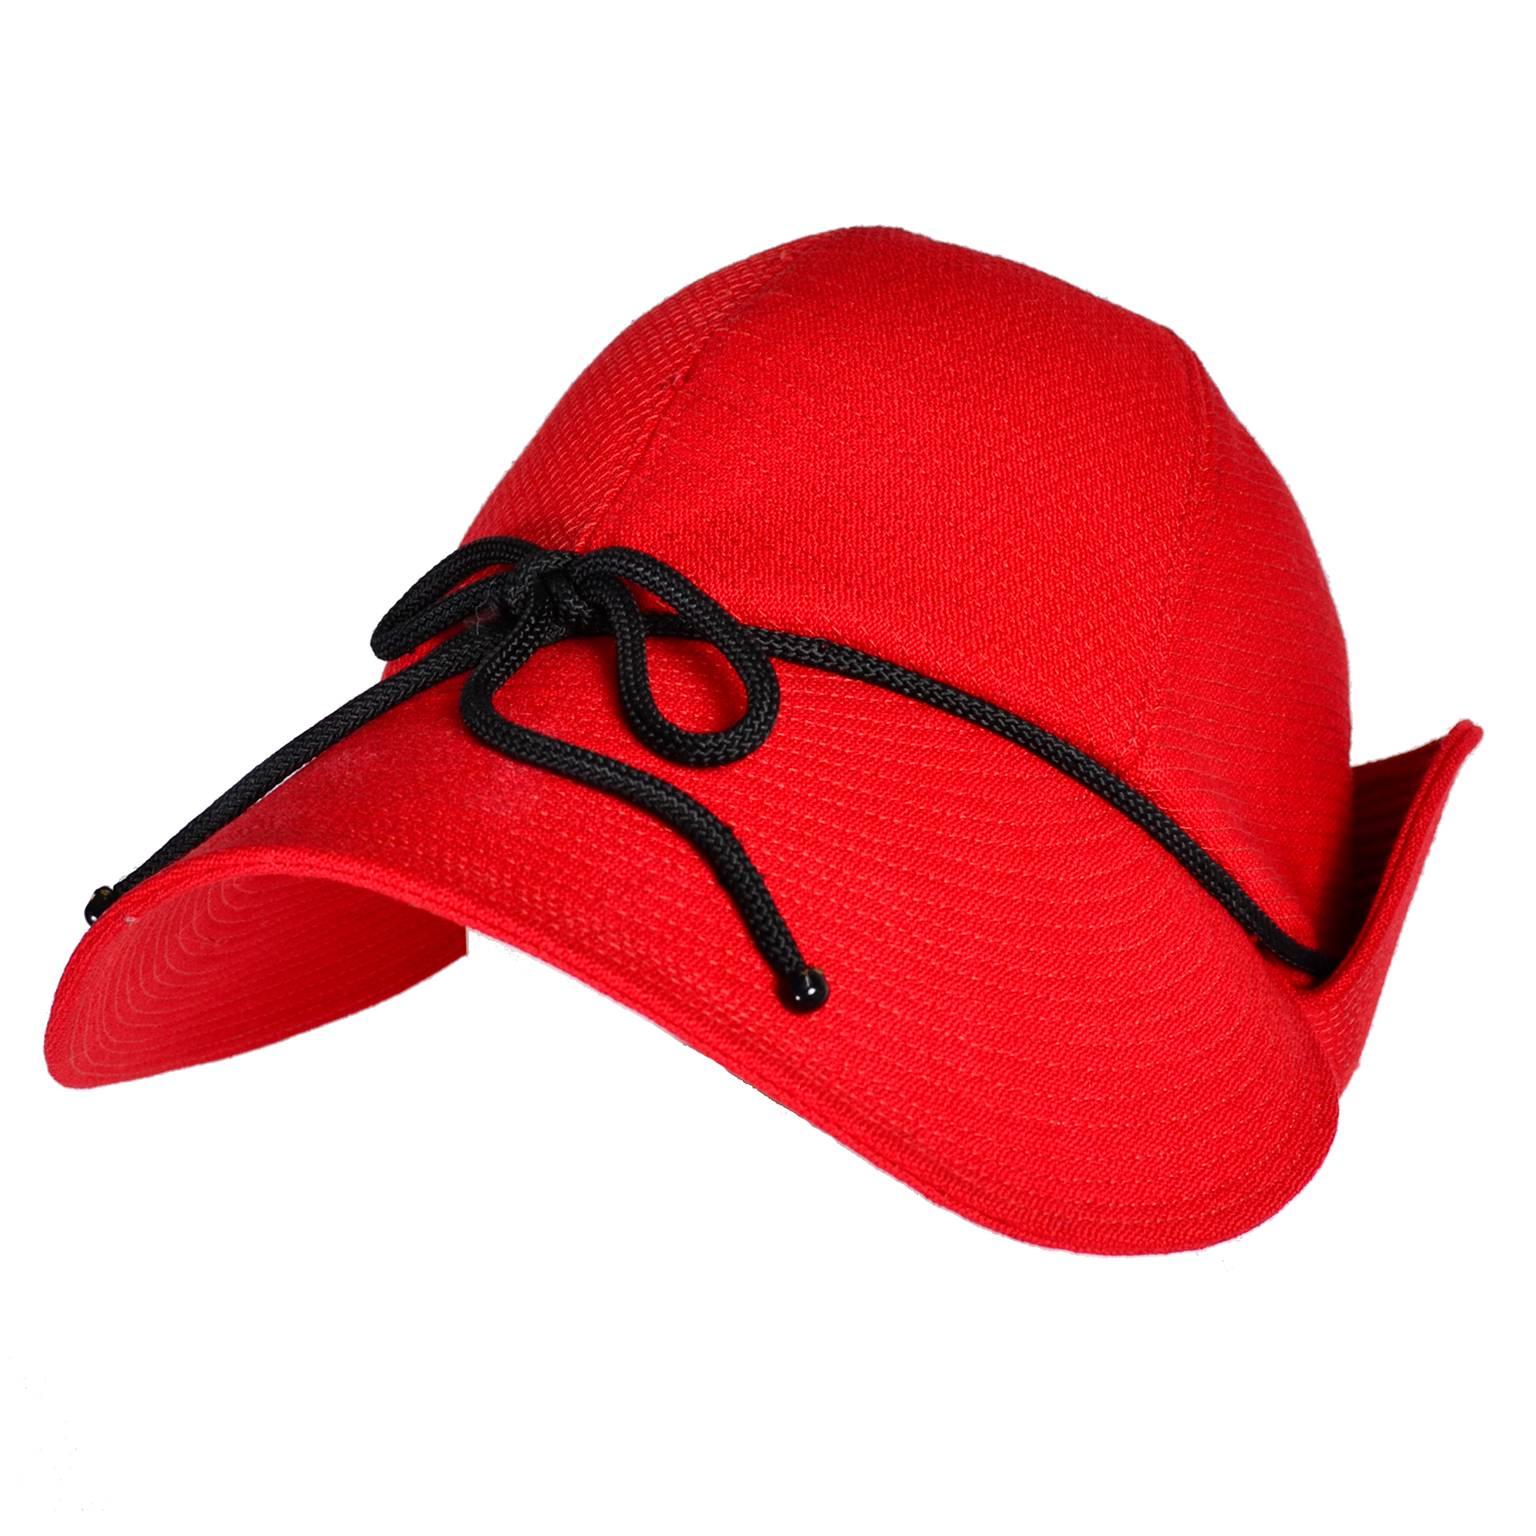 1970s Rare Yves Saint Laurent YSL Hat in Red with Black Trim